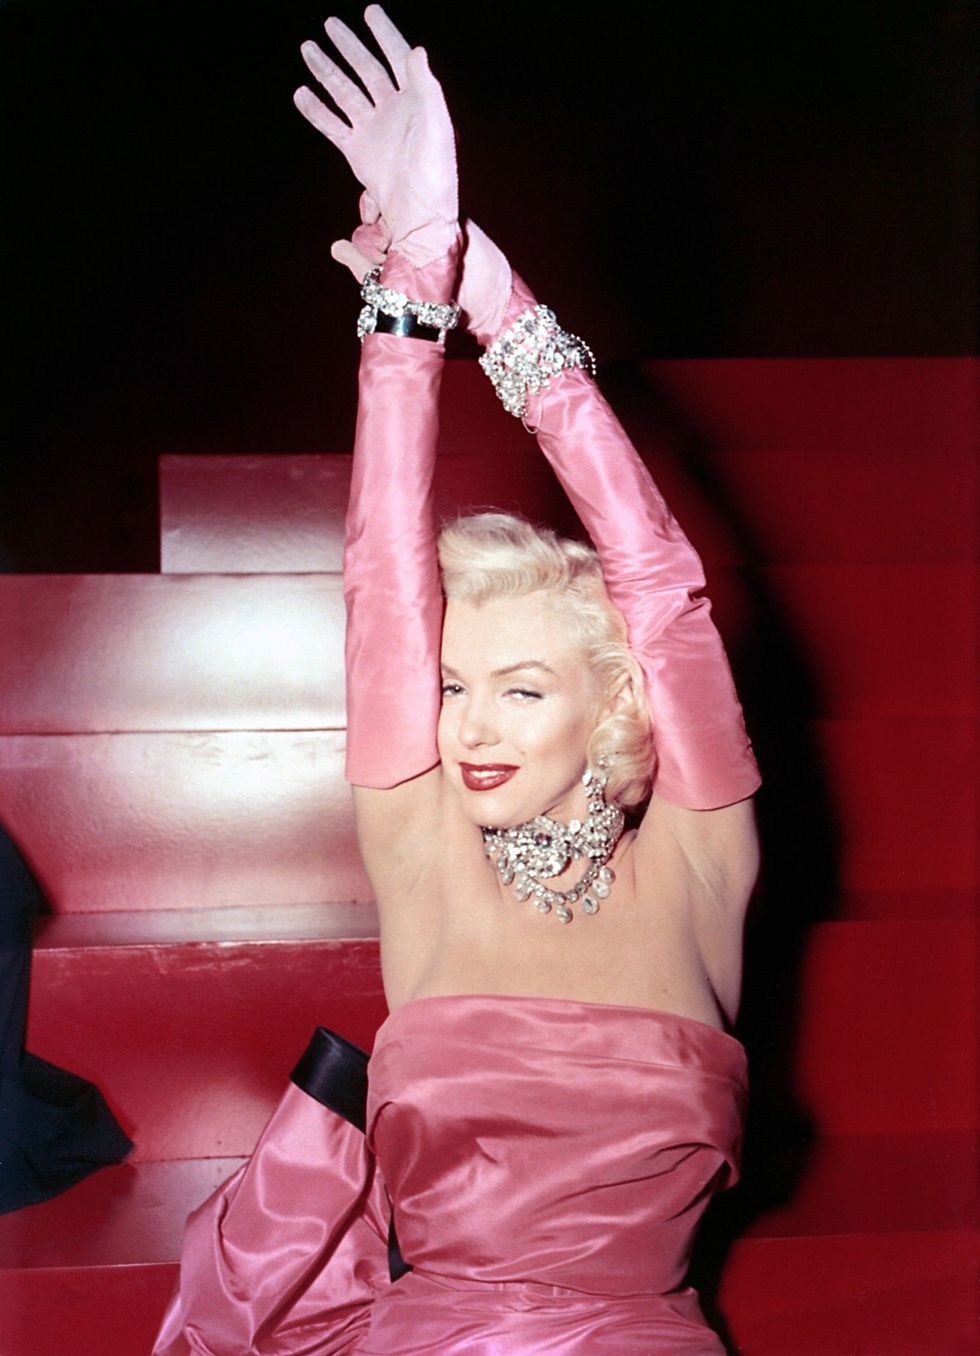 <p>Pretty in pink while singing "Diamonds Are a Girl's Best Friend," in the 1953 film <em data-redactor-tag="em">Gentlemen Prefer Blondes.</em></p>